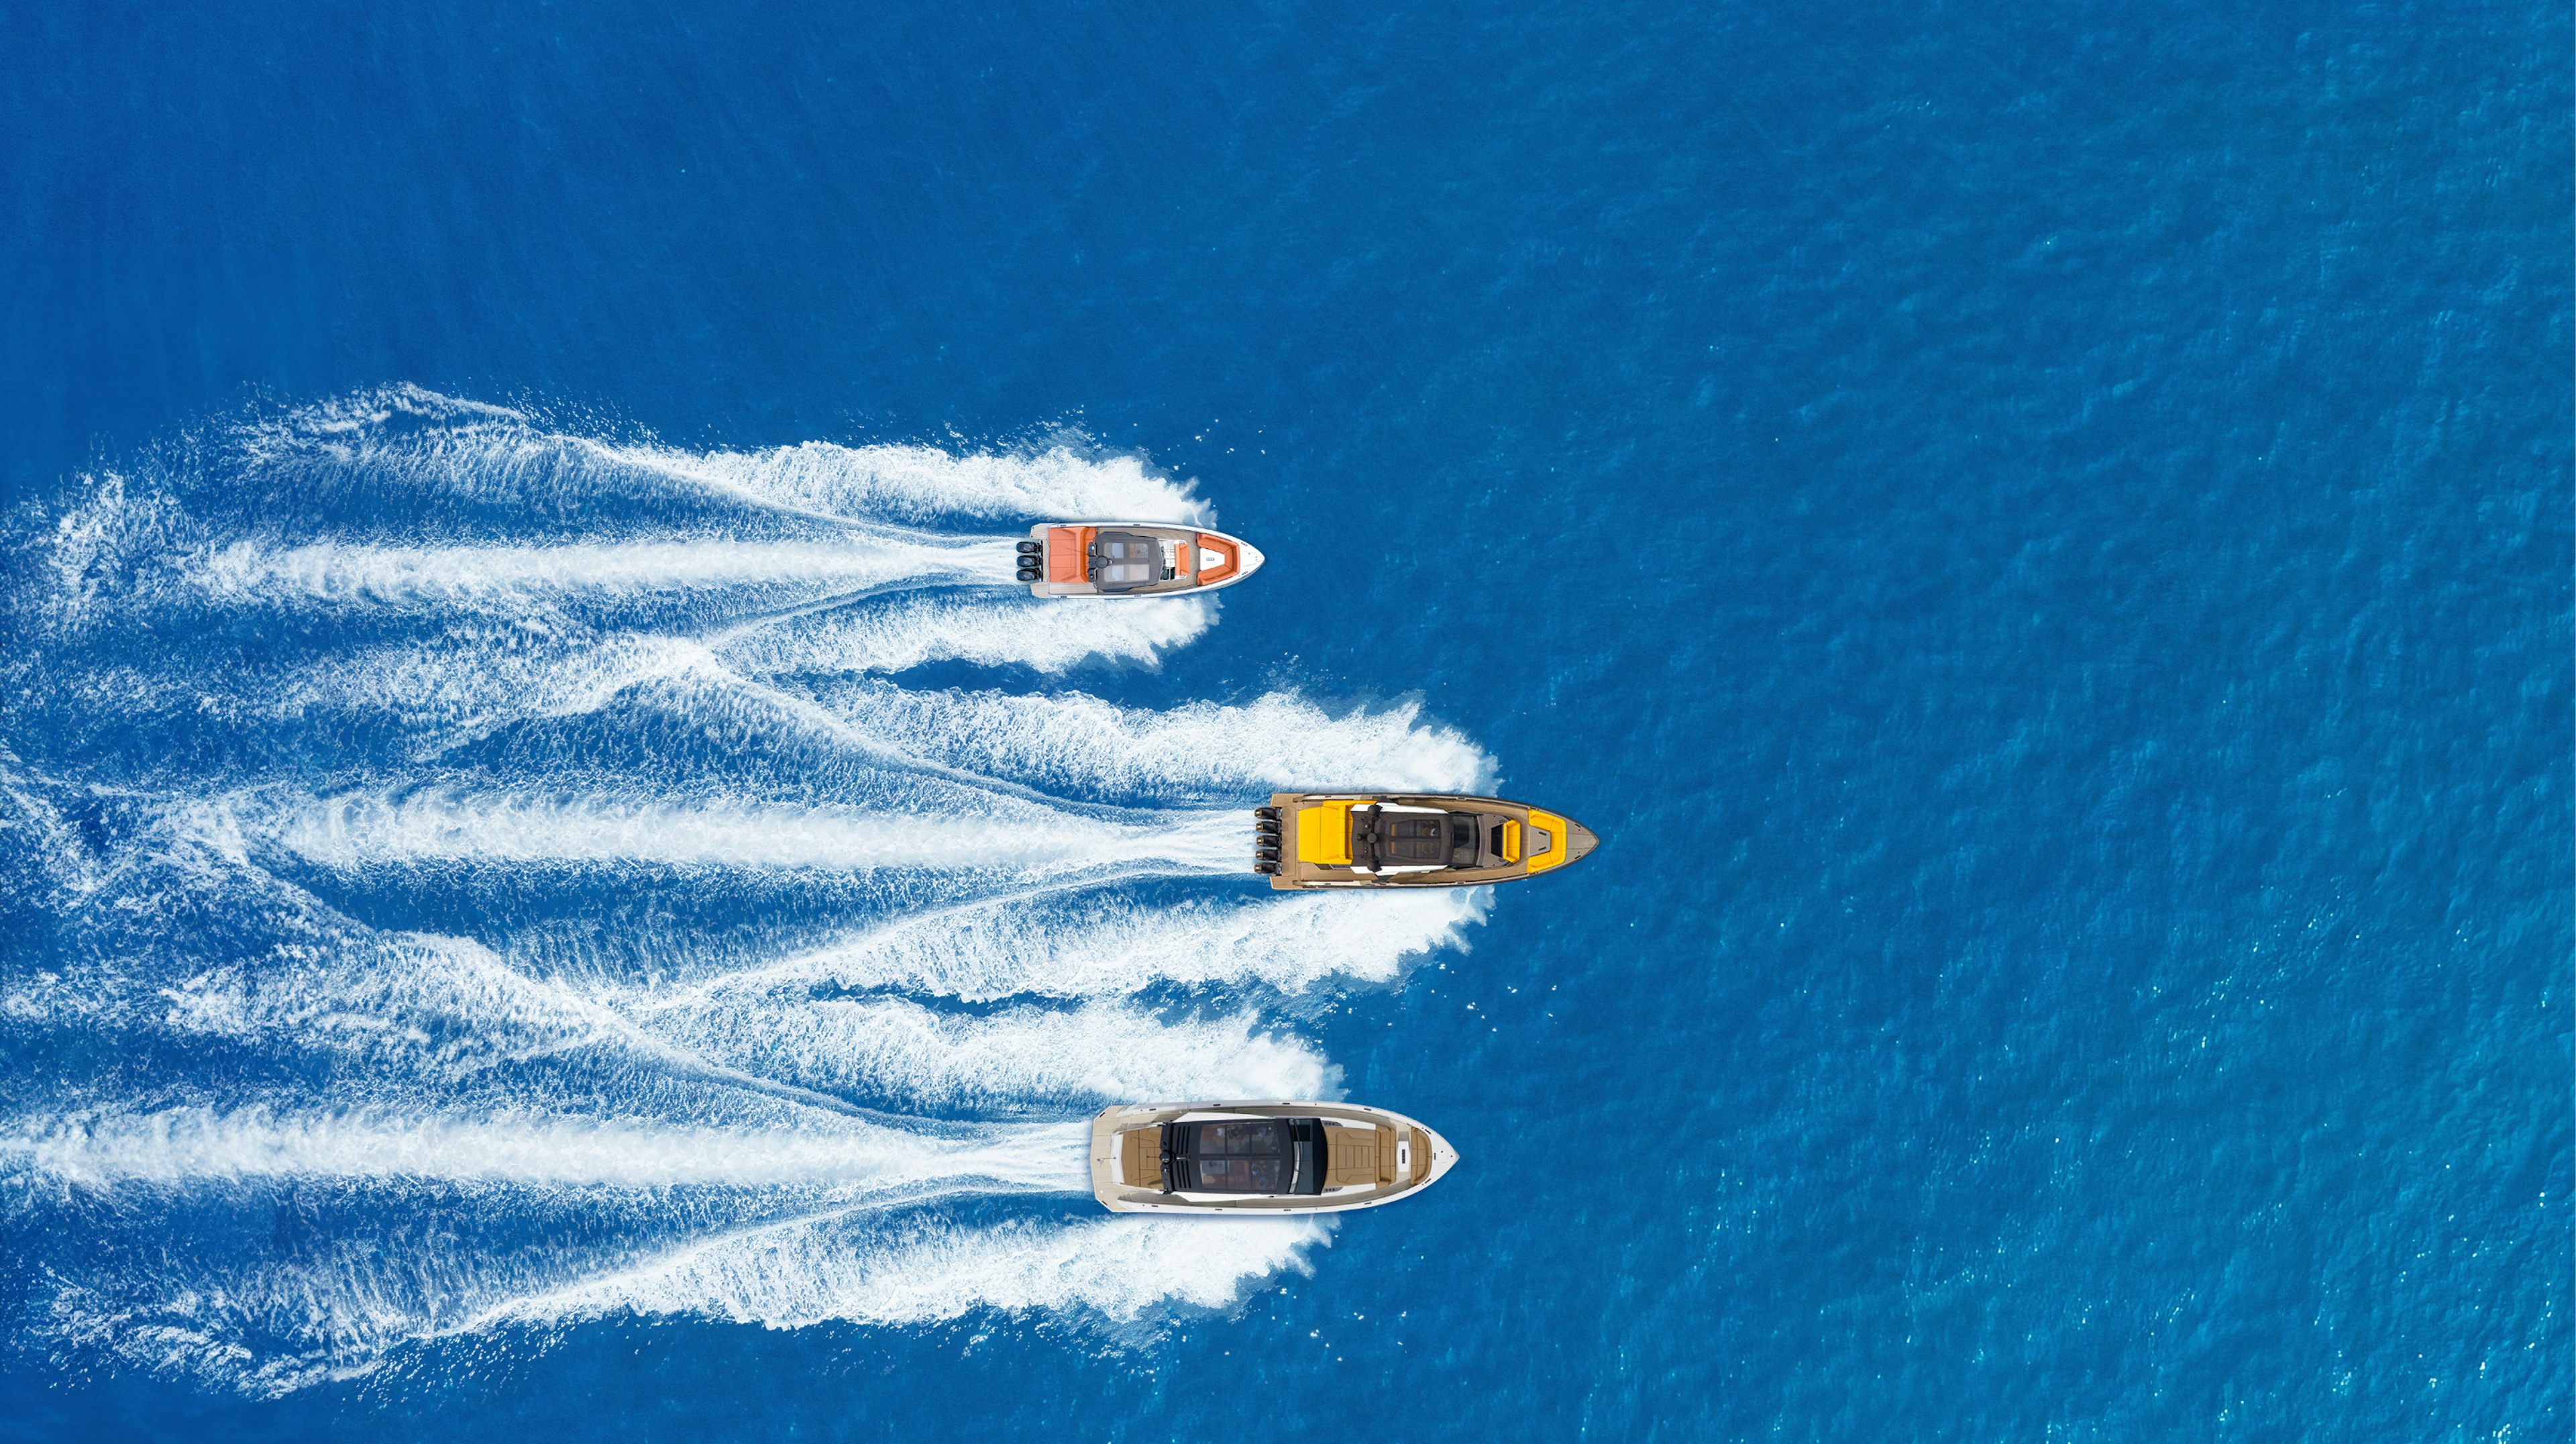 Vanquish Yachts brings the VQ55, VQ40, and VQ58 to the show